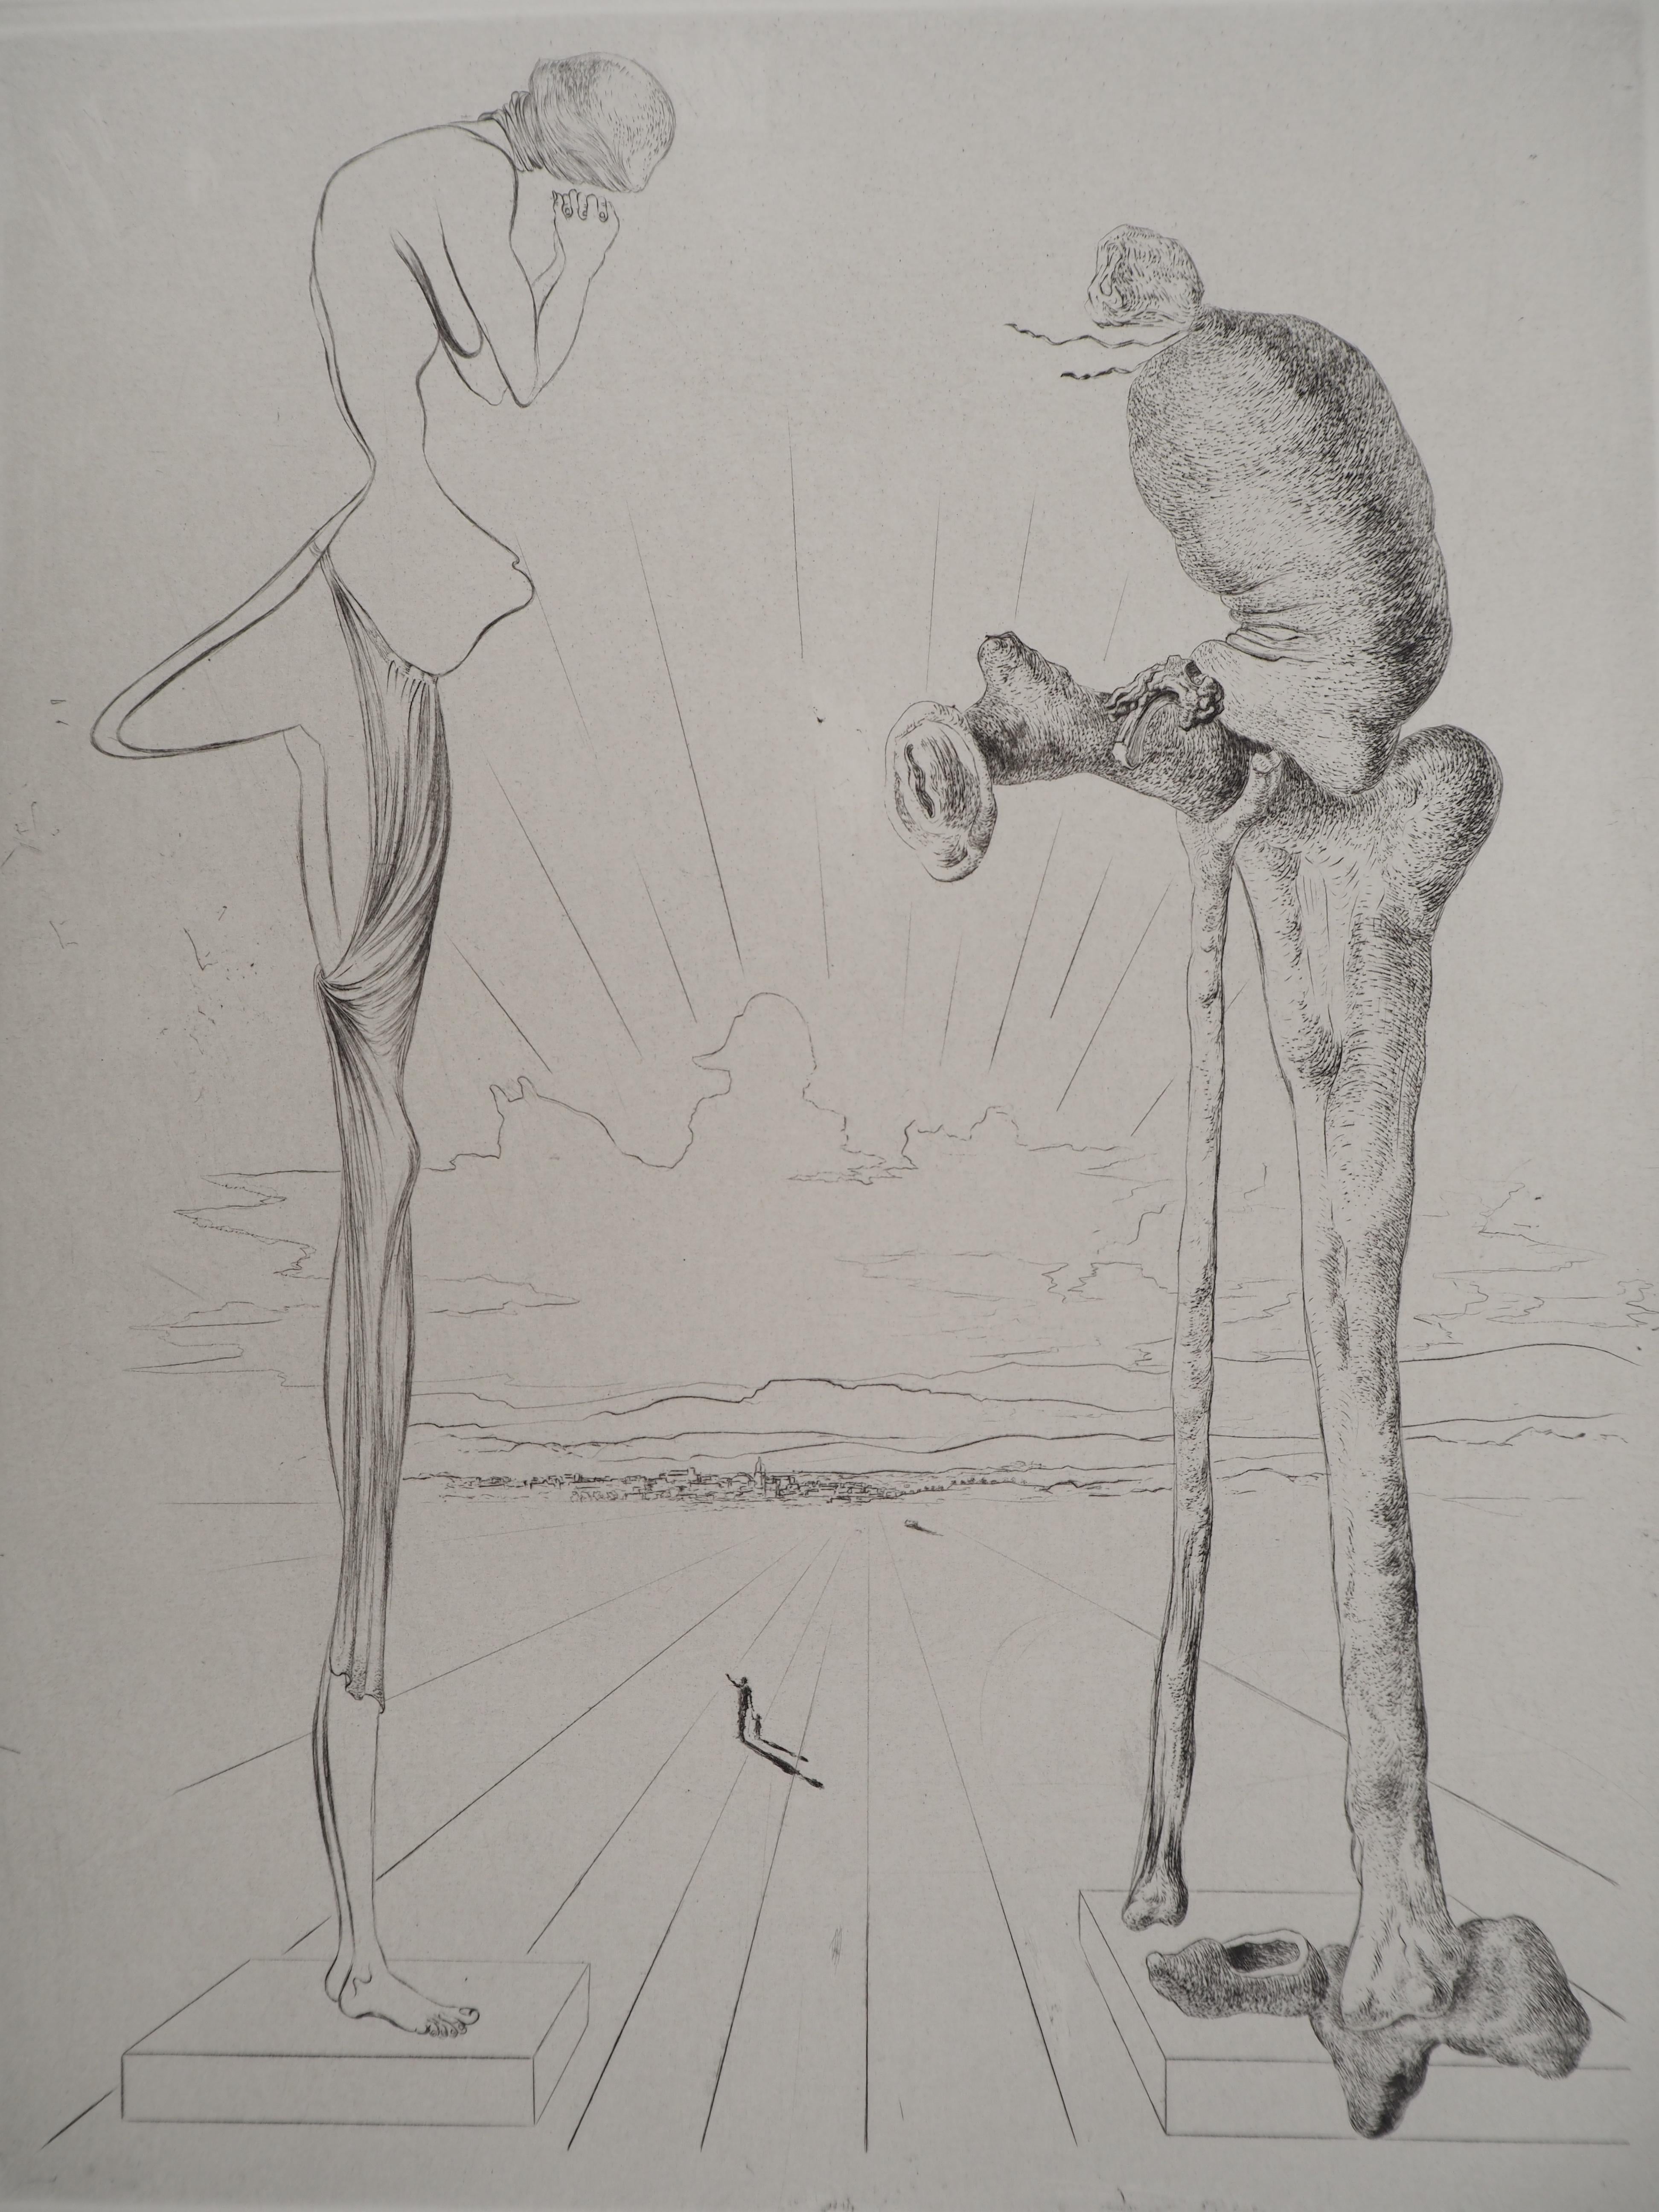 Maldoror : The giant with a bag - Original etching, HANDSIGNED - Surrealist Print by Salvador Dalí